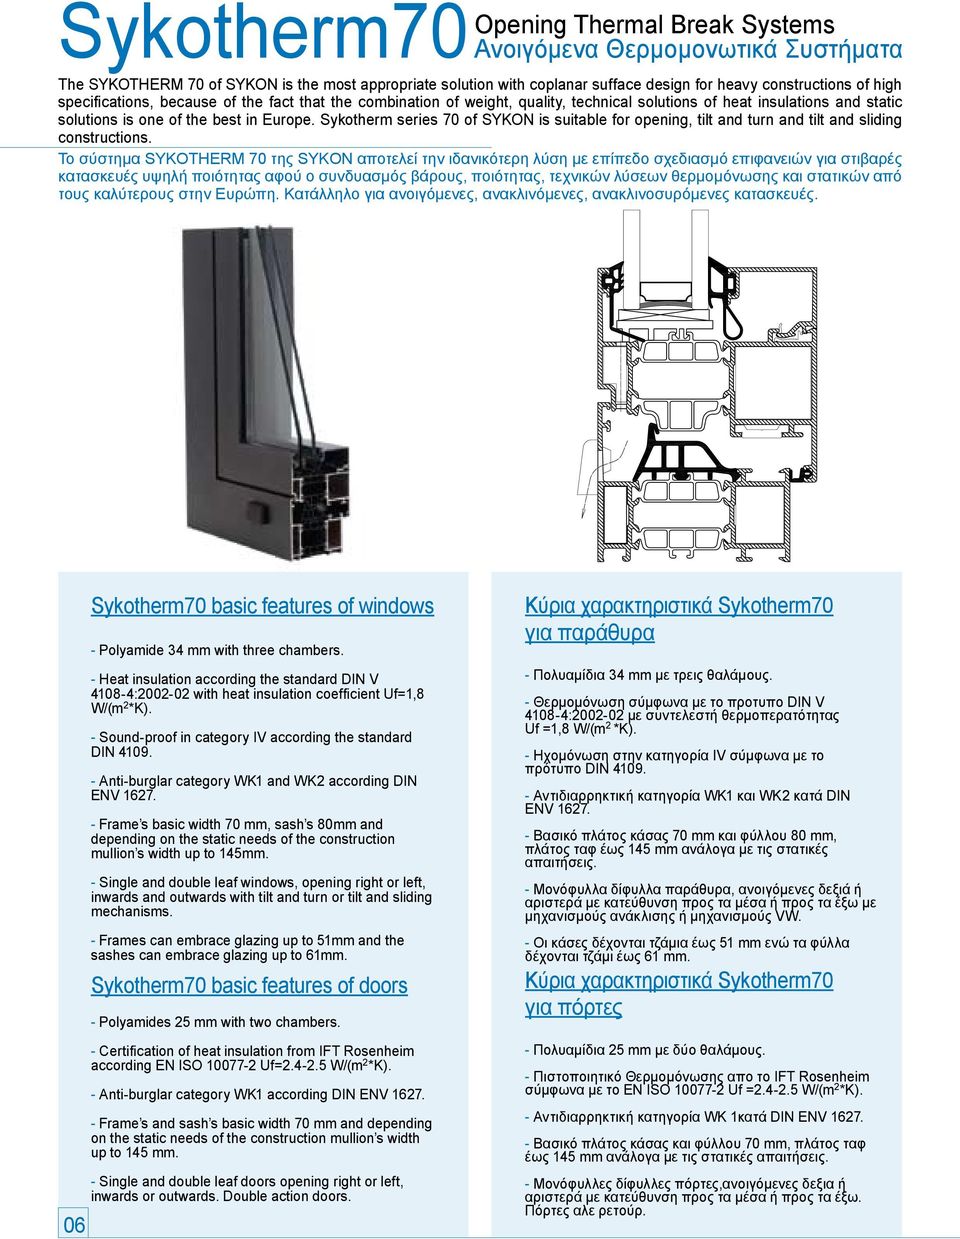 Sykotherm series 70 of SYKON is suitable for opening, tilt and turn and tilt and sliding constructions.